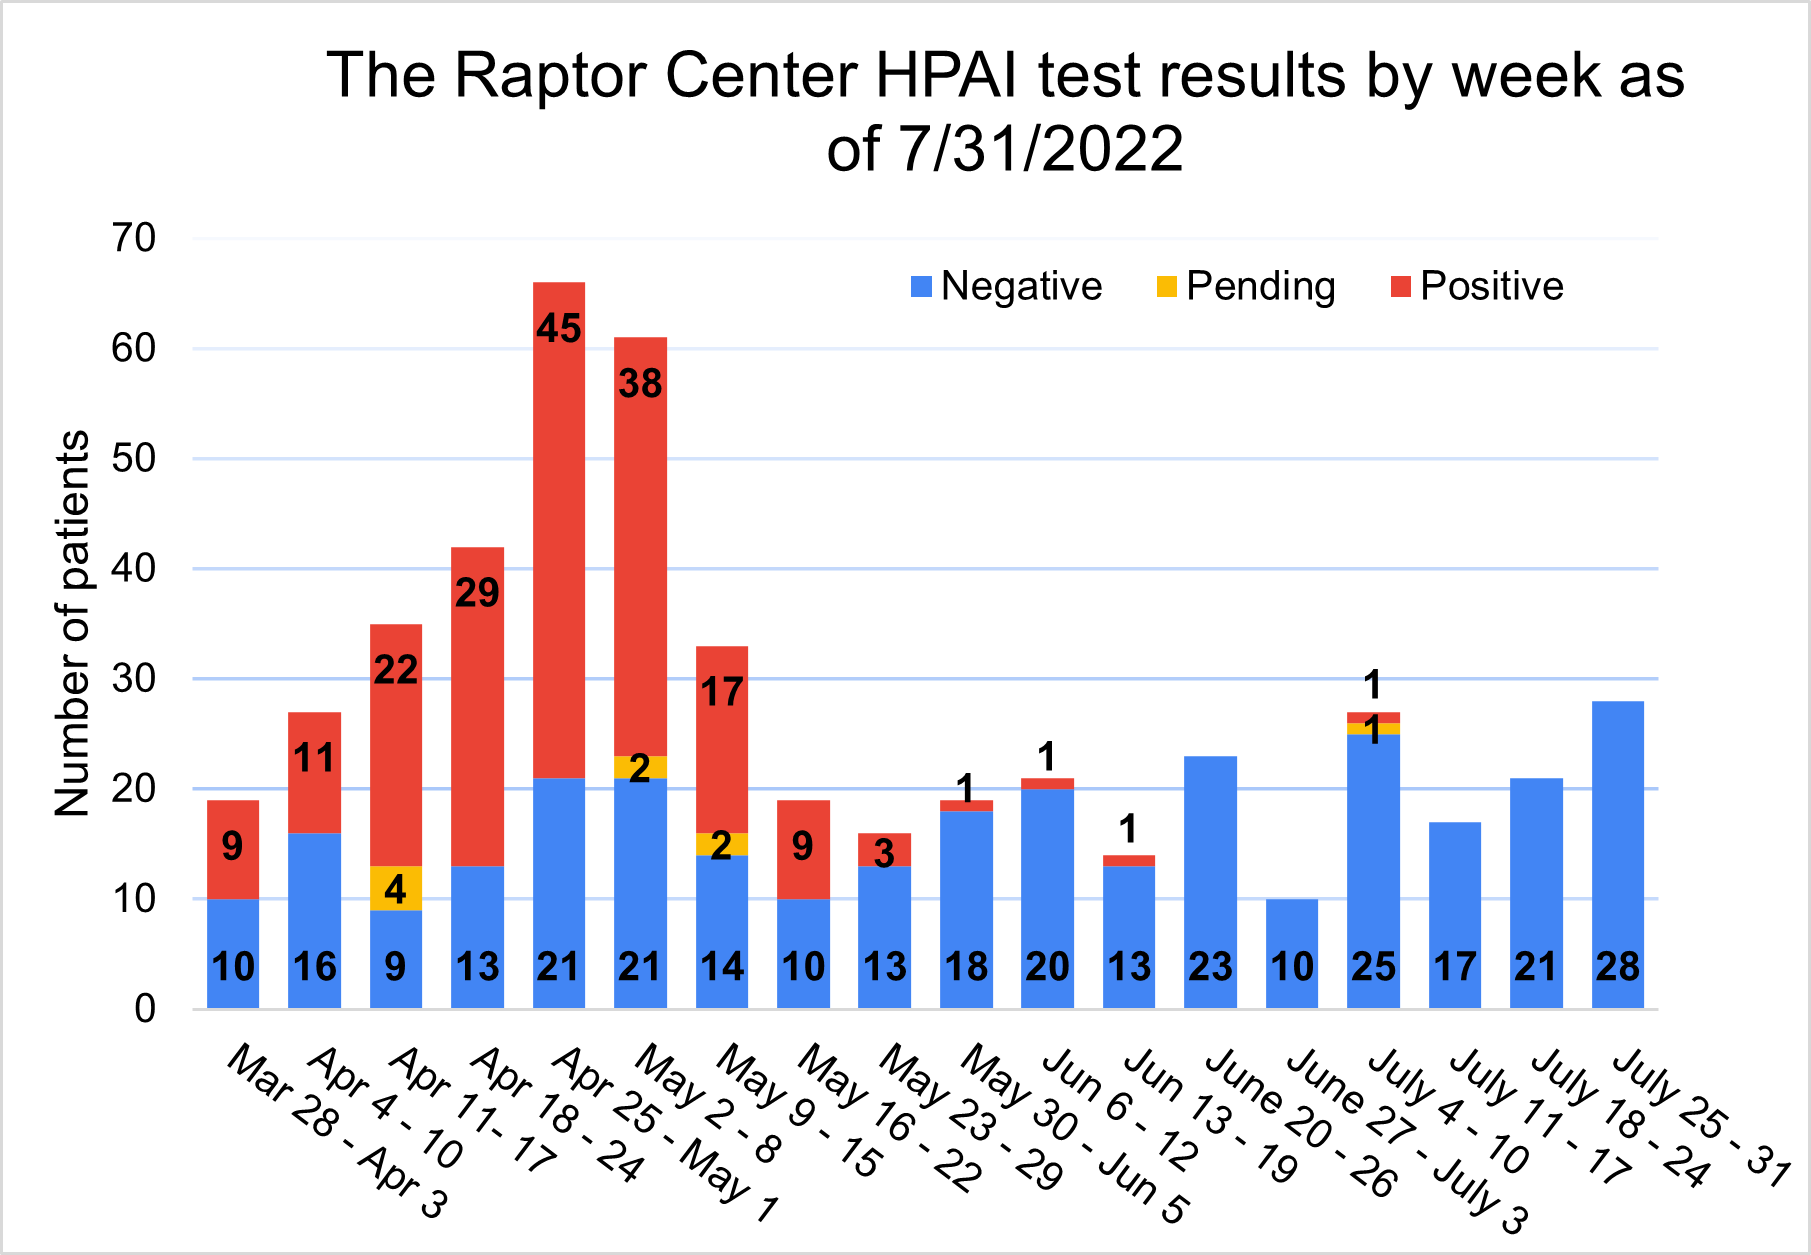 Stacked bar chart by week showing HPAI test results at The Raptor Center with the peak of positive cases in April and May. No new cases since July 7